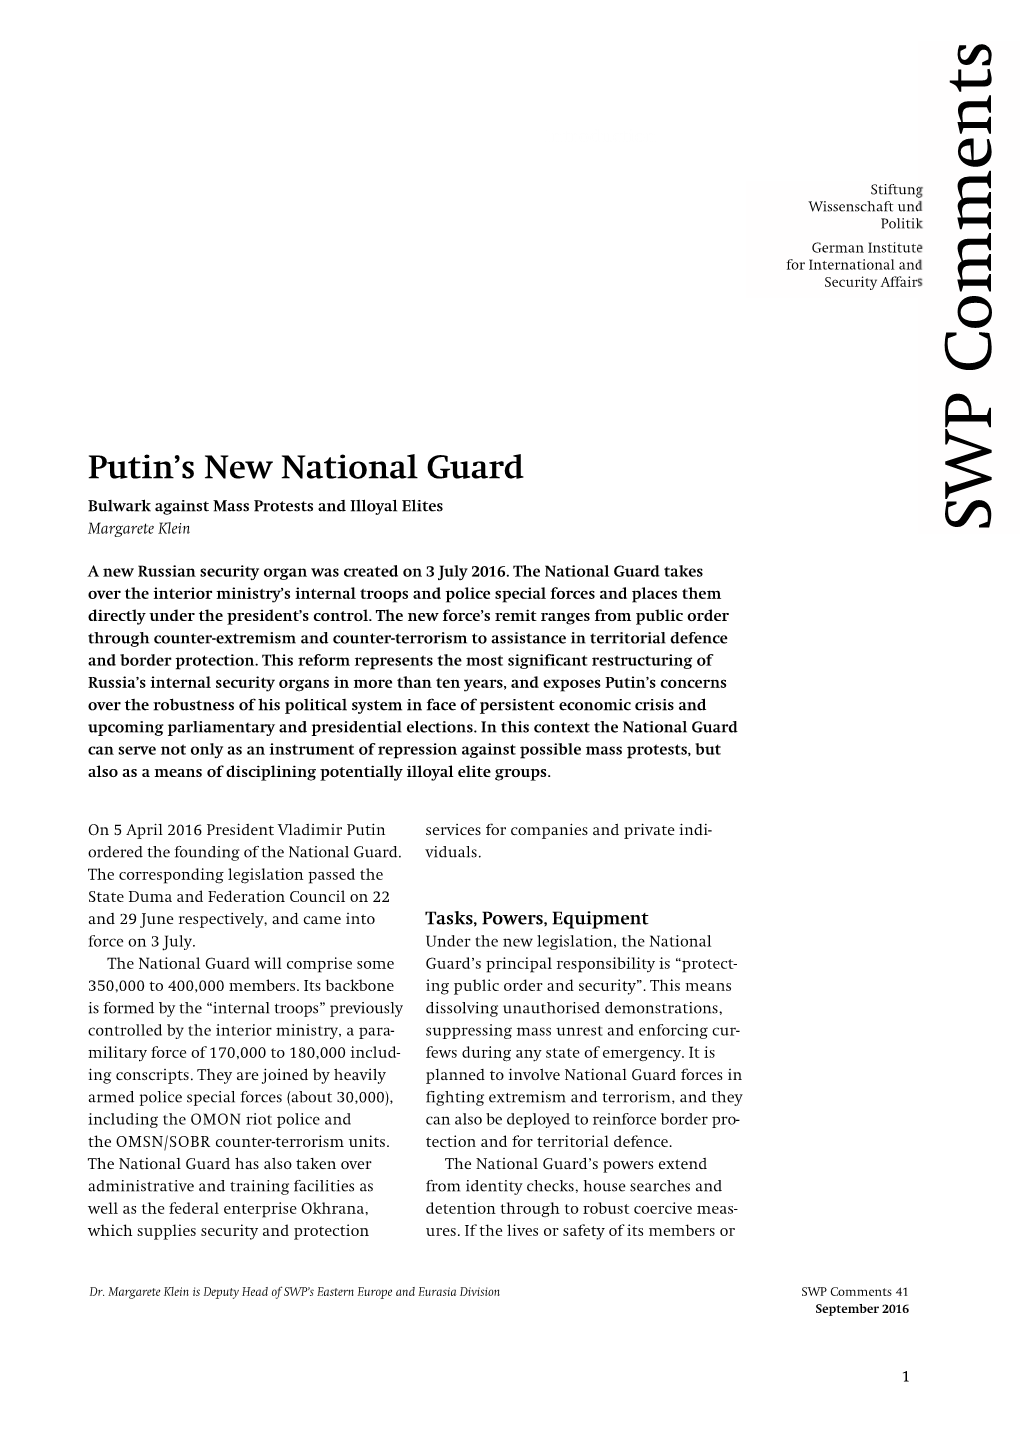 Putin's New National Guard. Bulwark Against Mass Protests and Illoyal